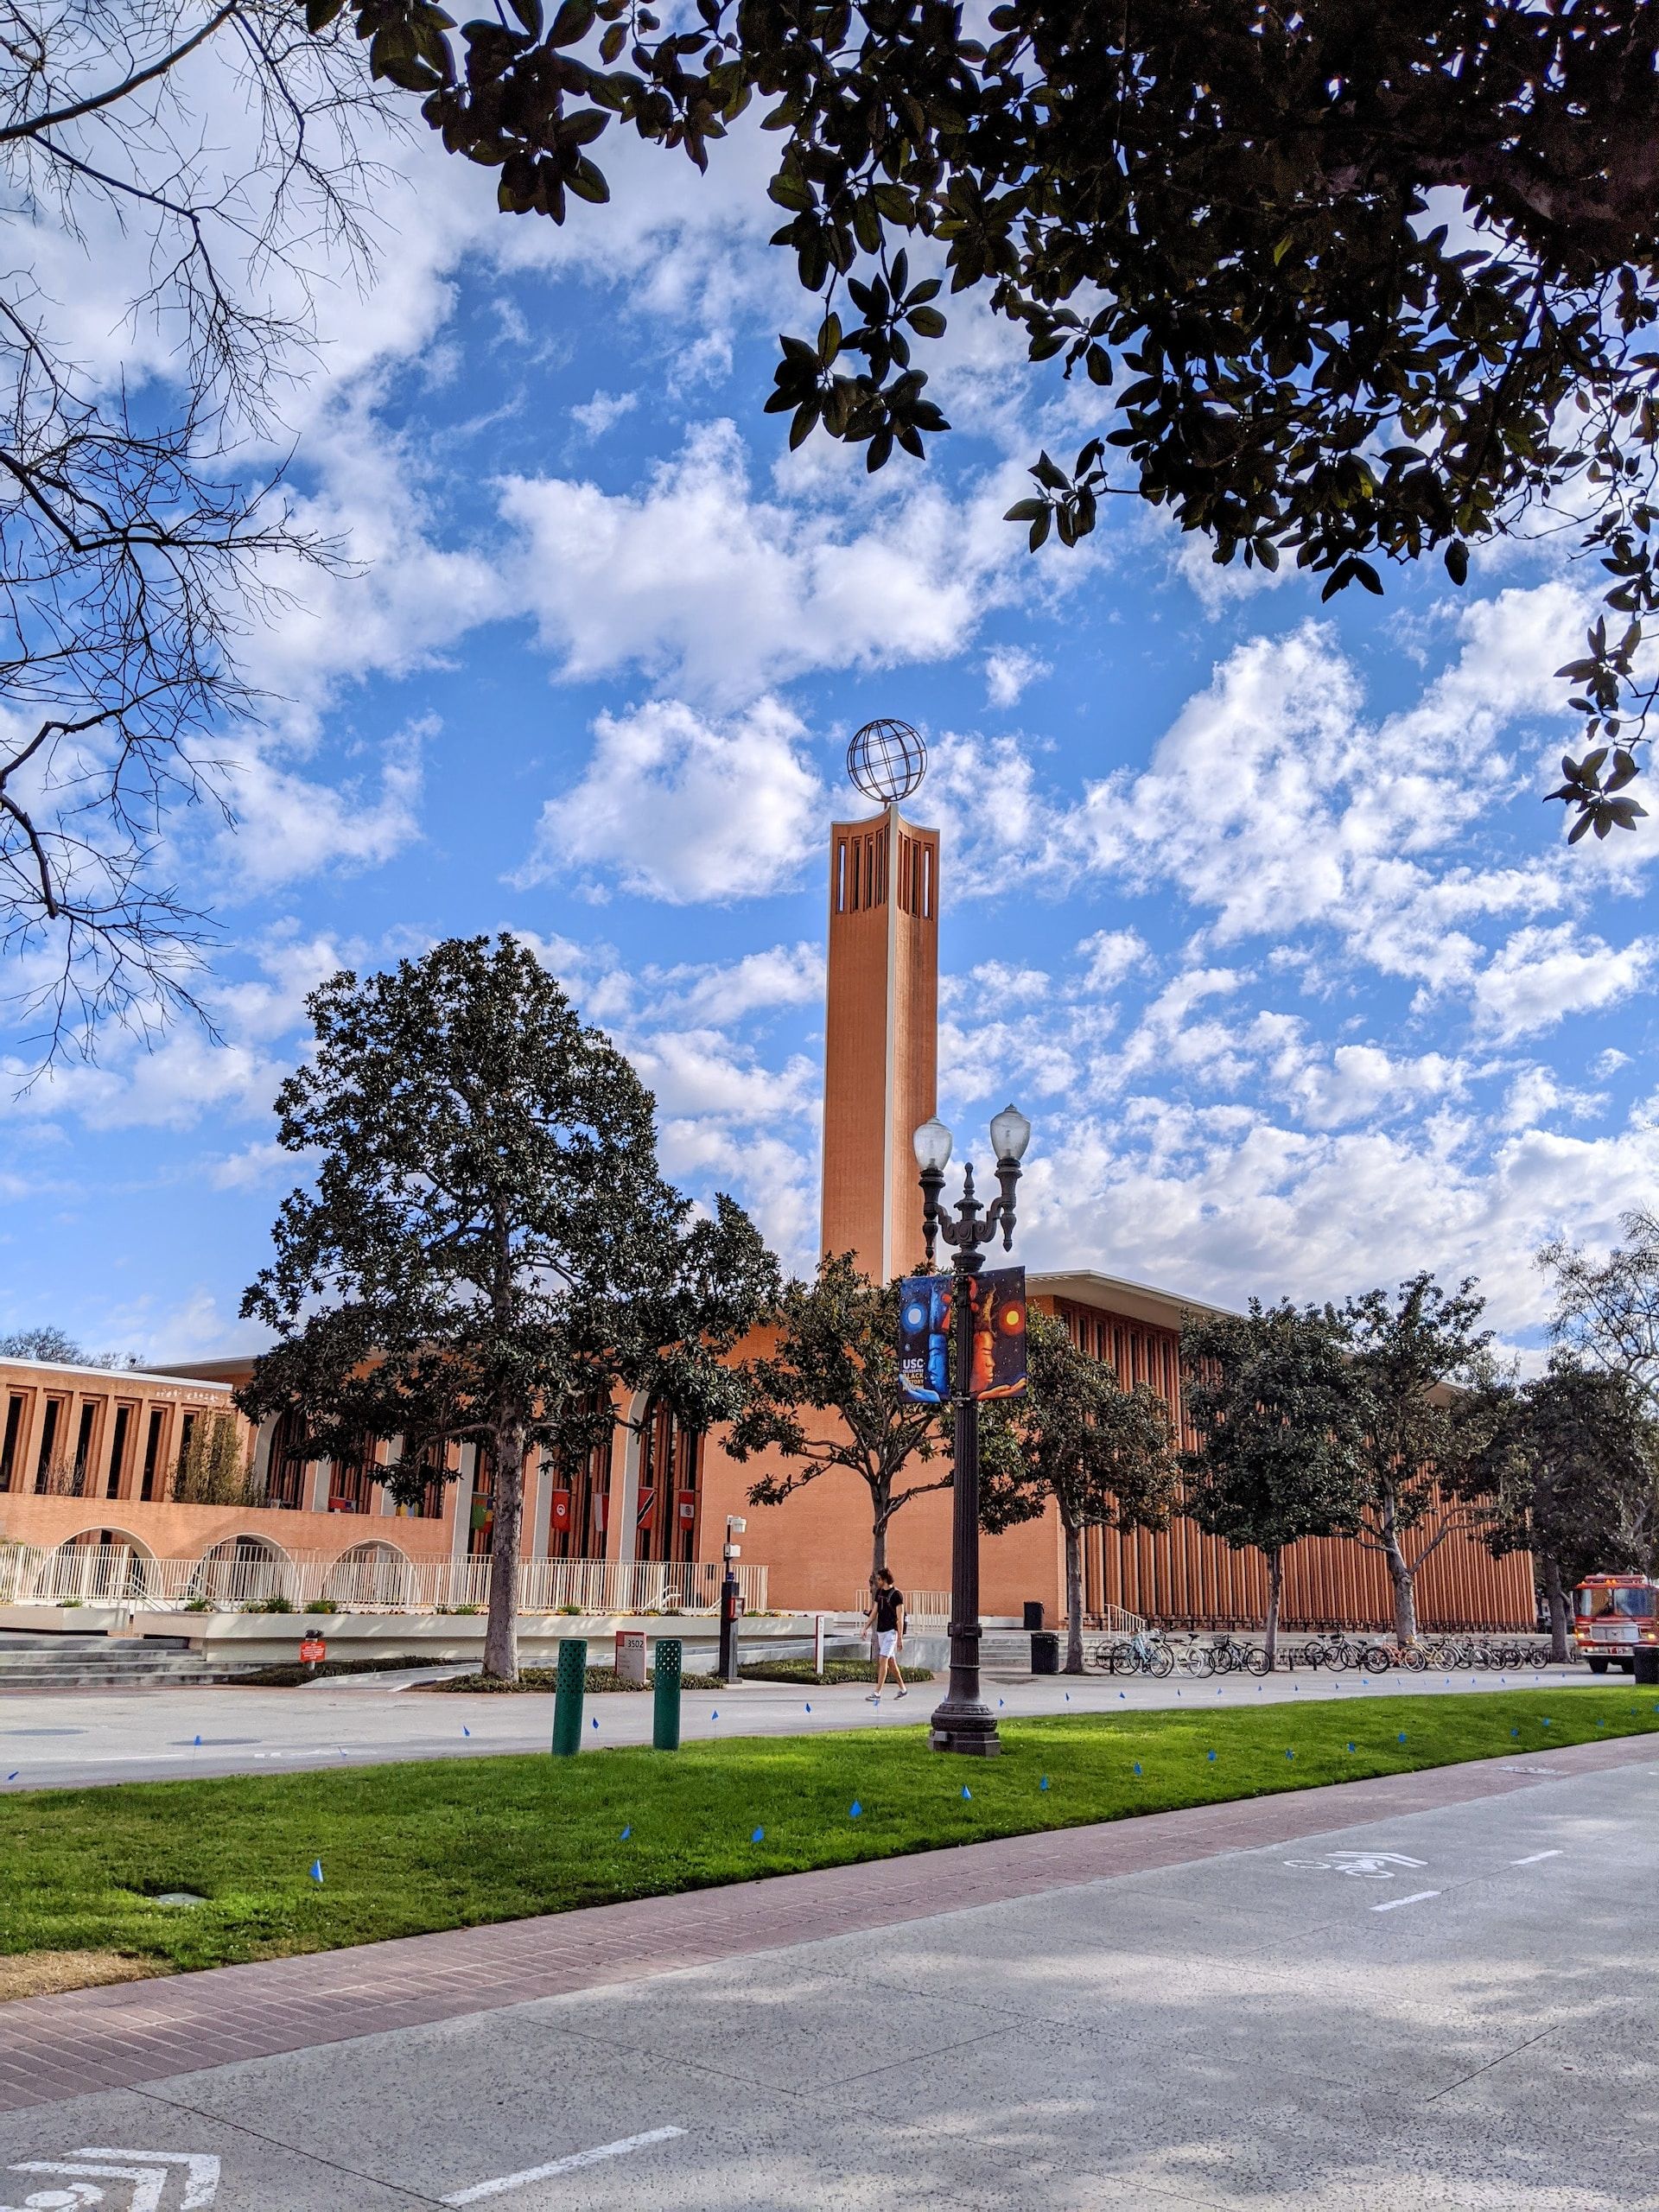 University of Southern California in Los Angeles, California